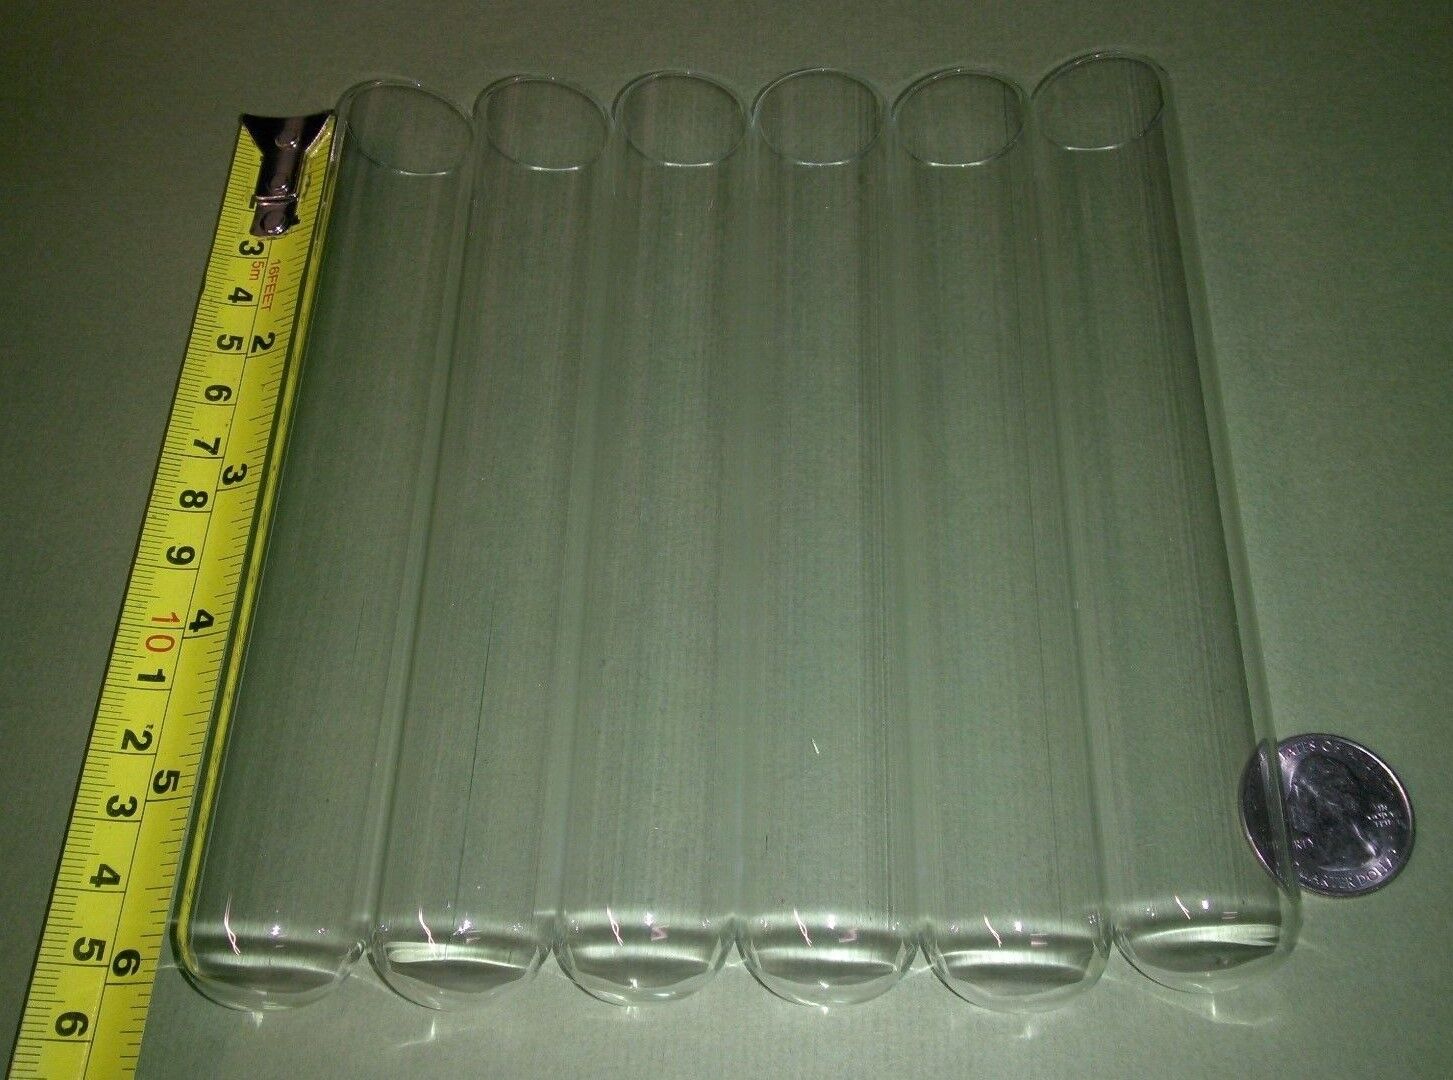 6 big NEW glass test tubes tube, Borosilicate (Pyrex equiv) large 25 x 150 Fisherbrand Does Not Apply